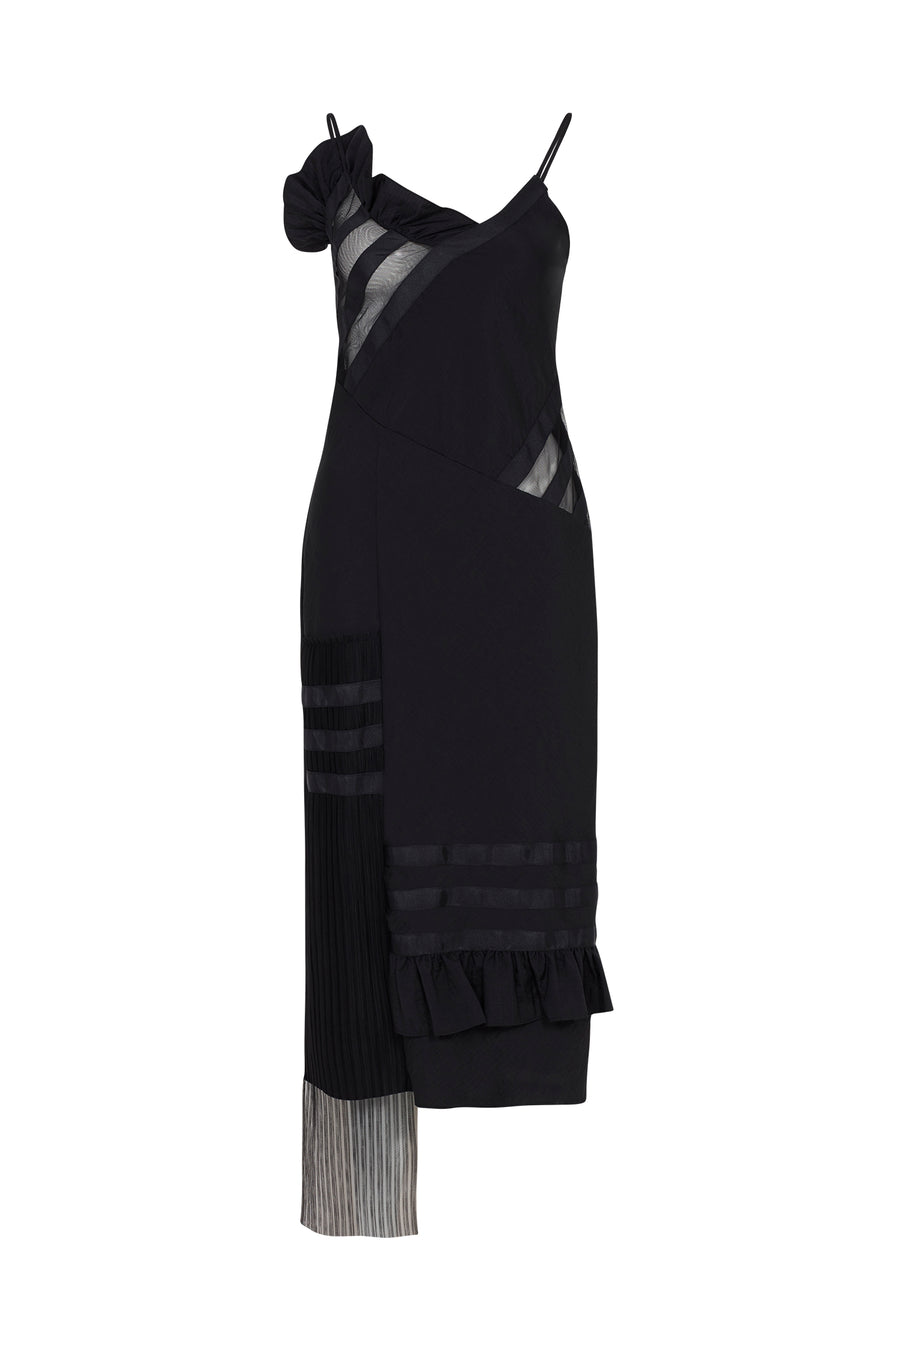 Black Ripstop Slip Dress by House of Holland